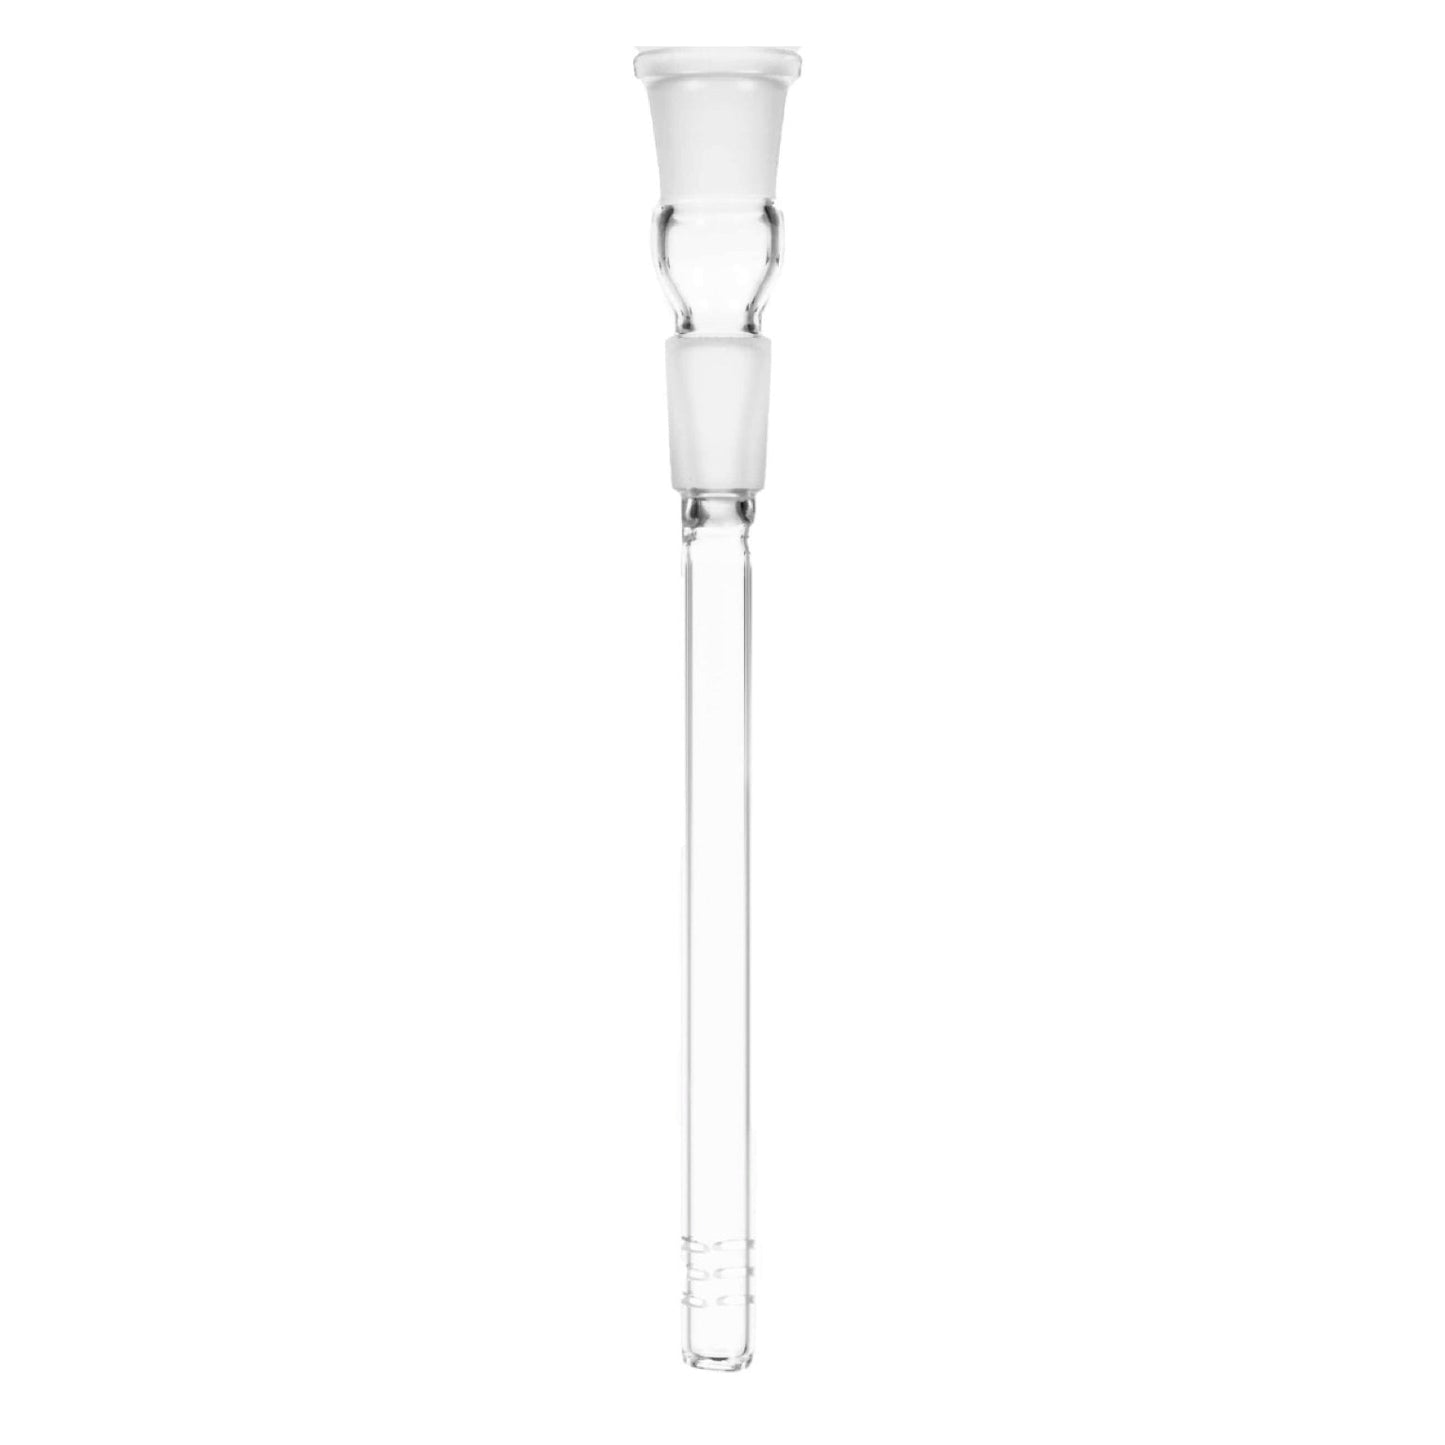 18mm to 18mm Diffuser Downstem by Mission Dispensary | Mission Dispensary